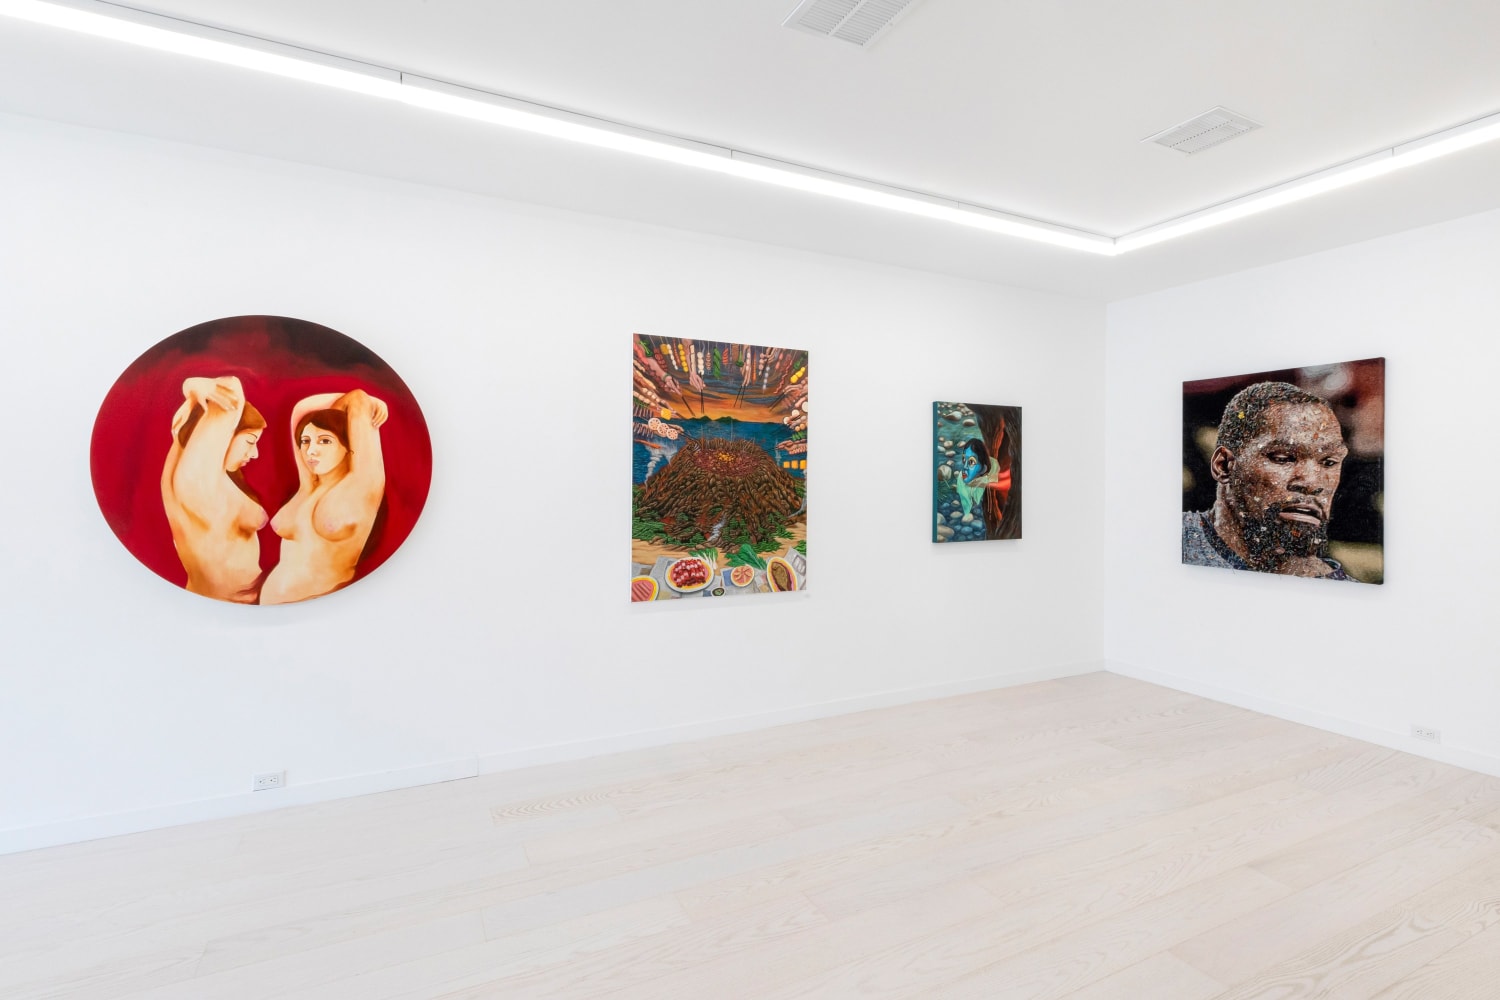 36 Paintings (installation view)